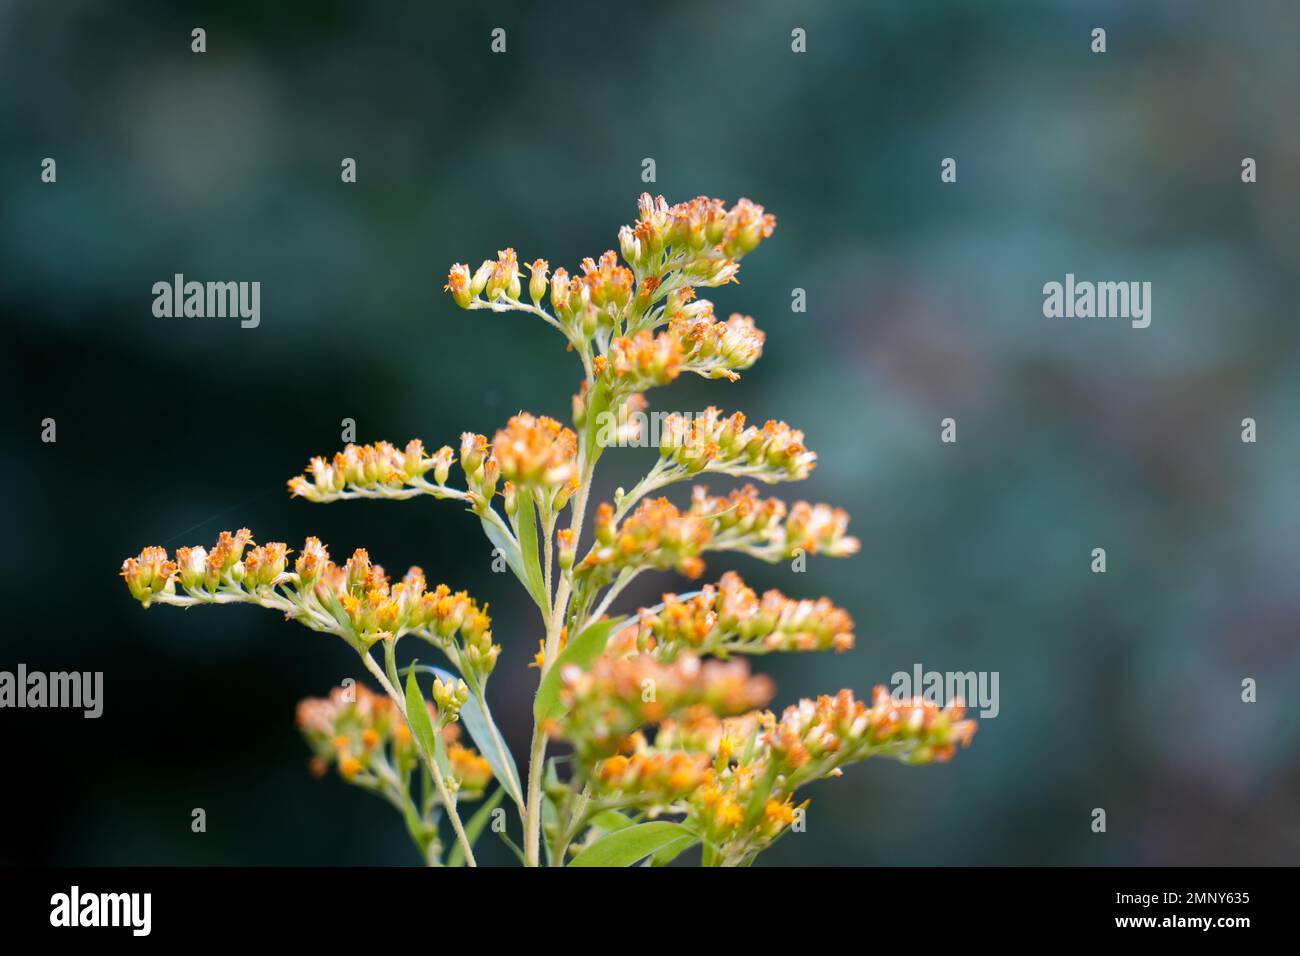 Goldenrod, Solidago. Yellow flowers of the plant close-up. Stock Photo